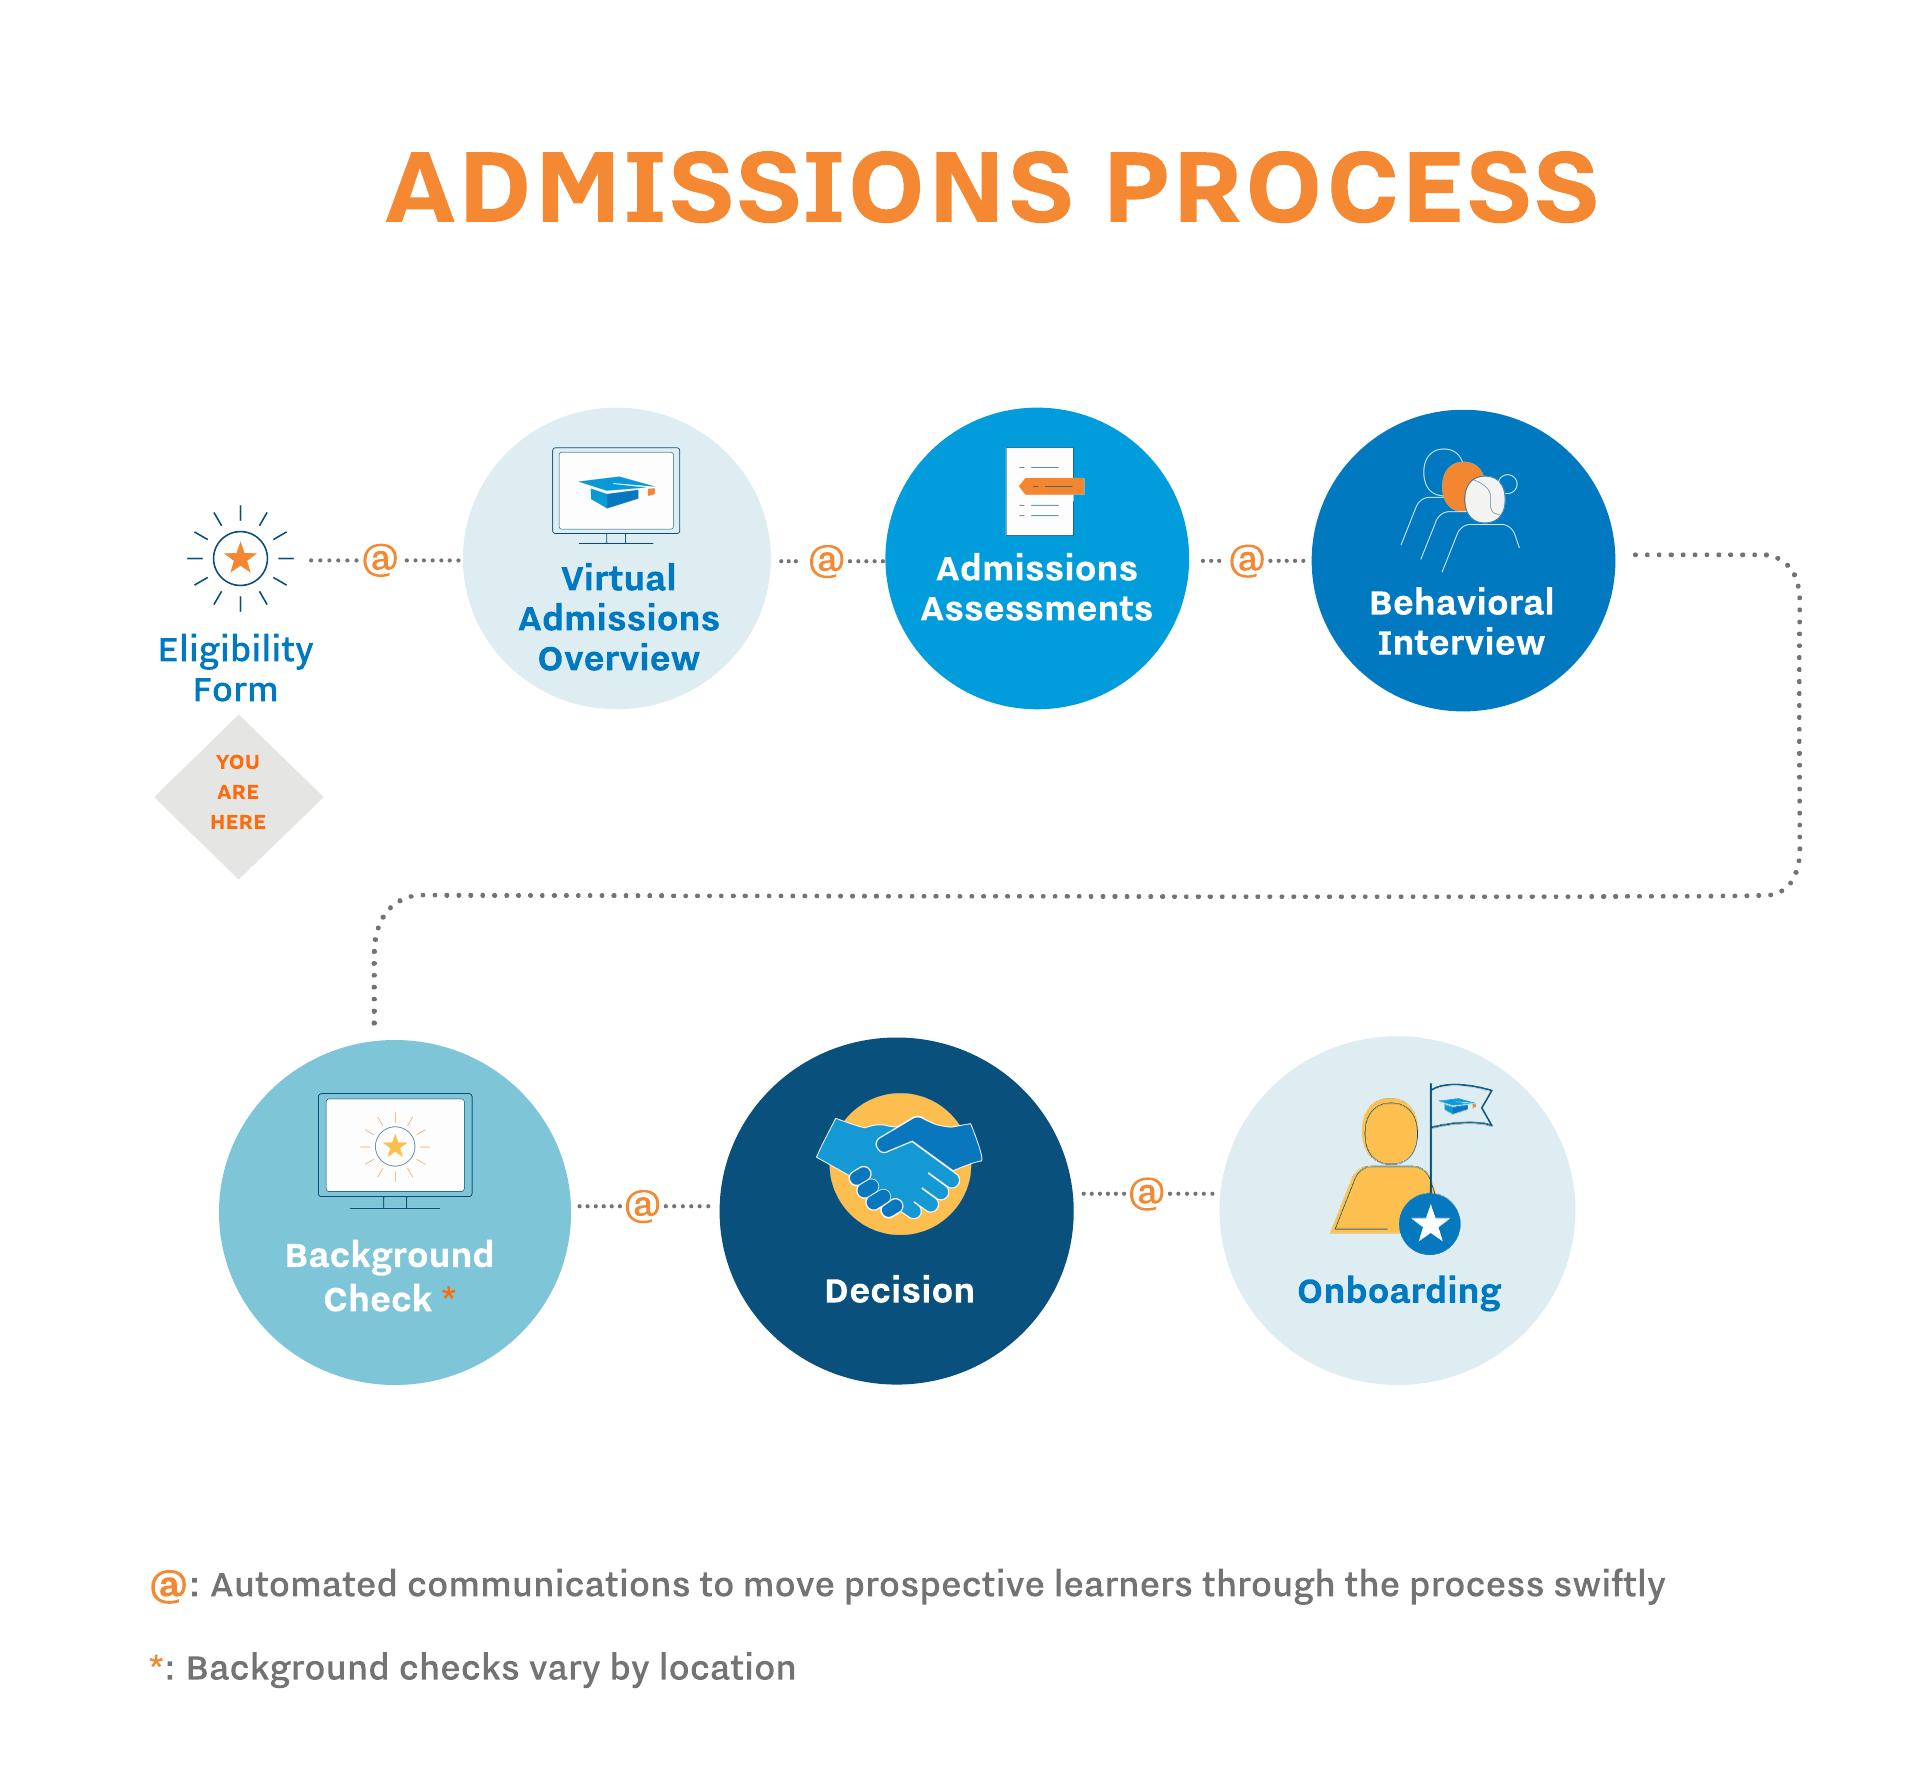 2022 Admissions Process - Eligibility Form 'You Are Here' Stage